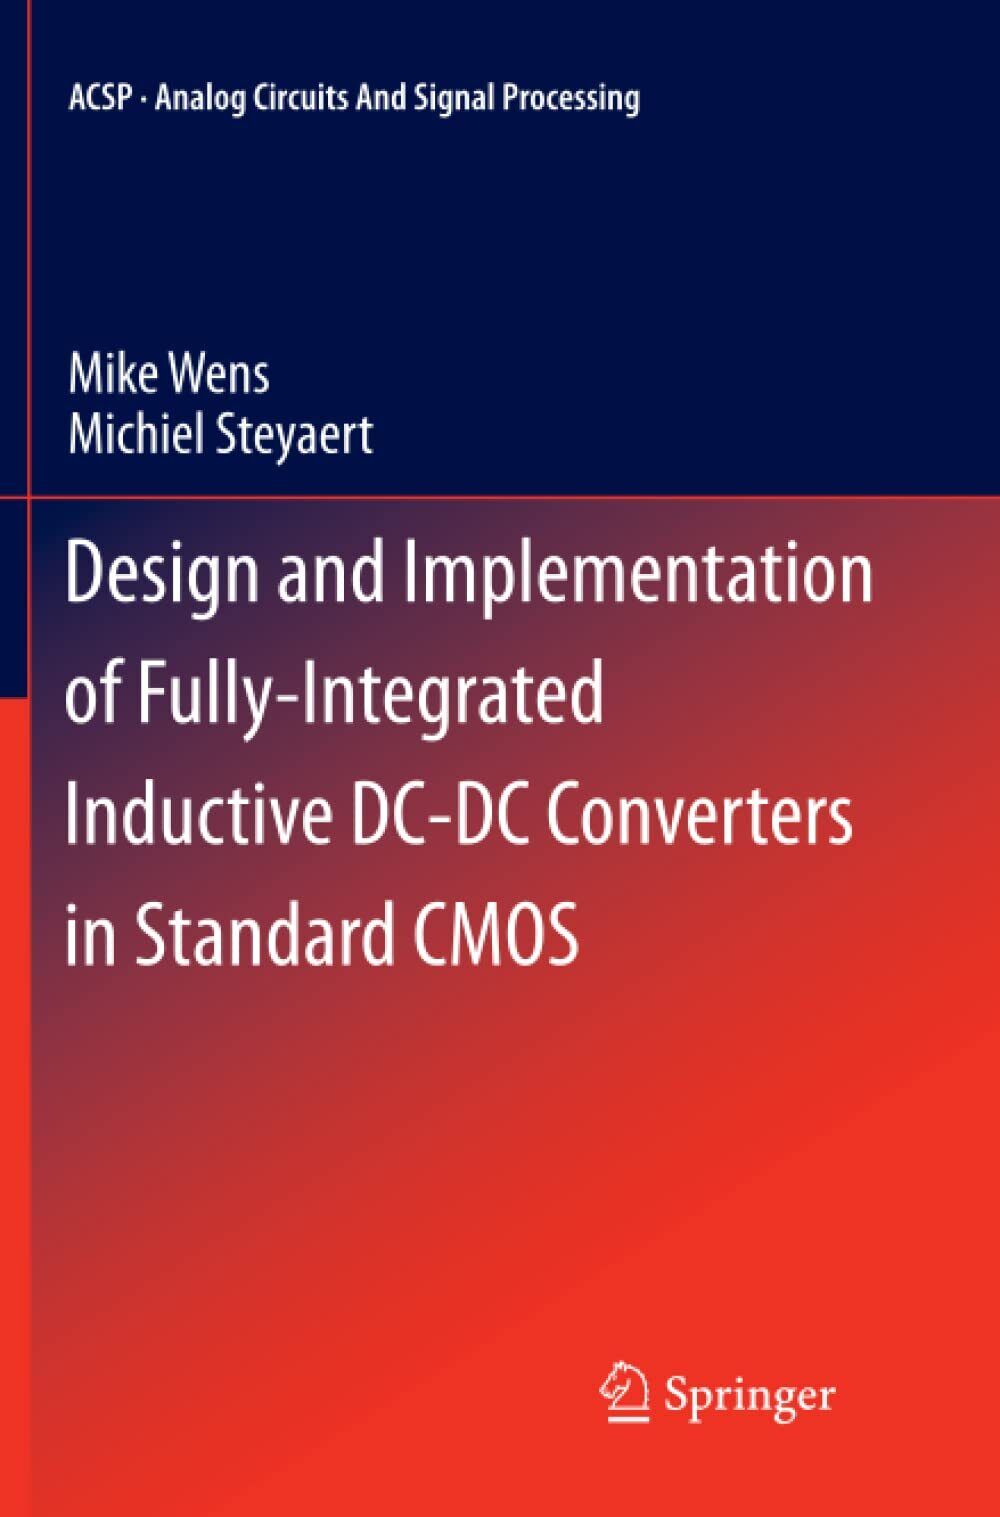 Design and Implementation of Fully-Integrated Inductive DC-DC Converters in CMOS